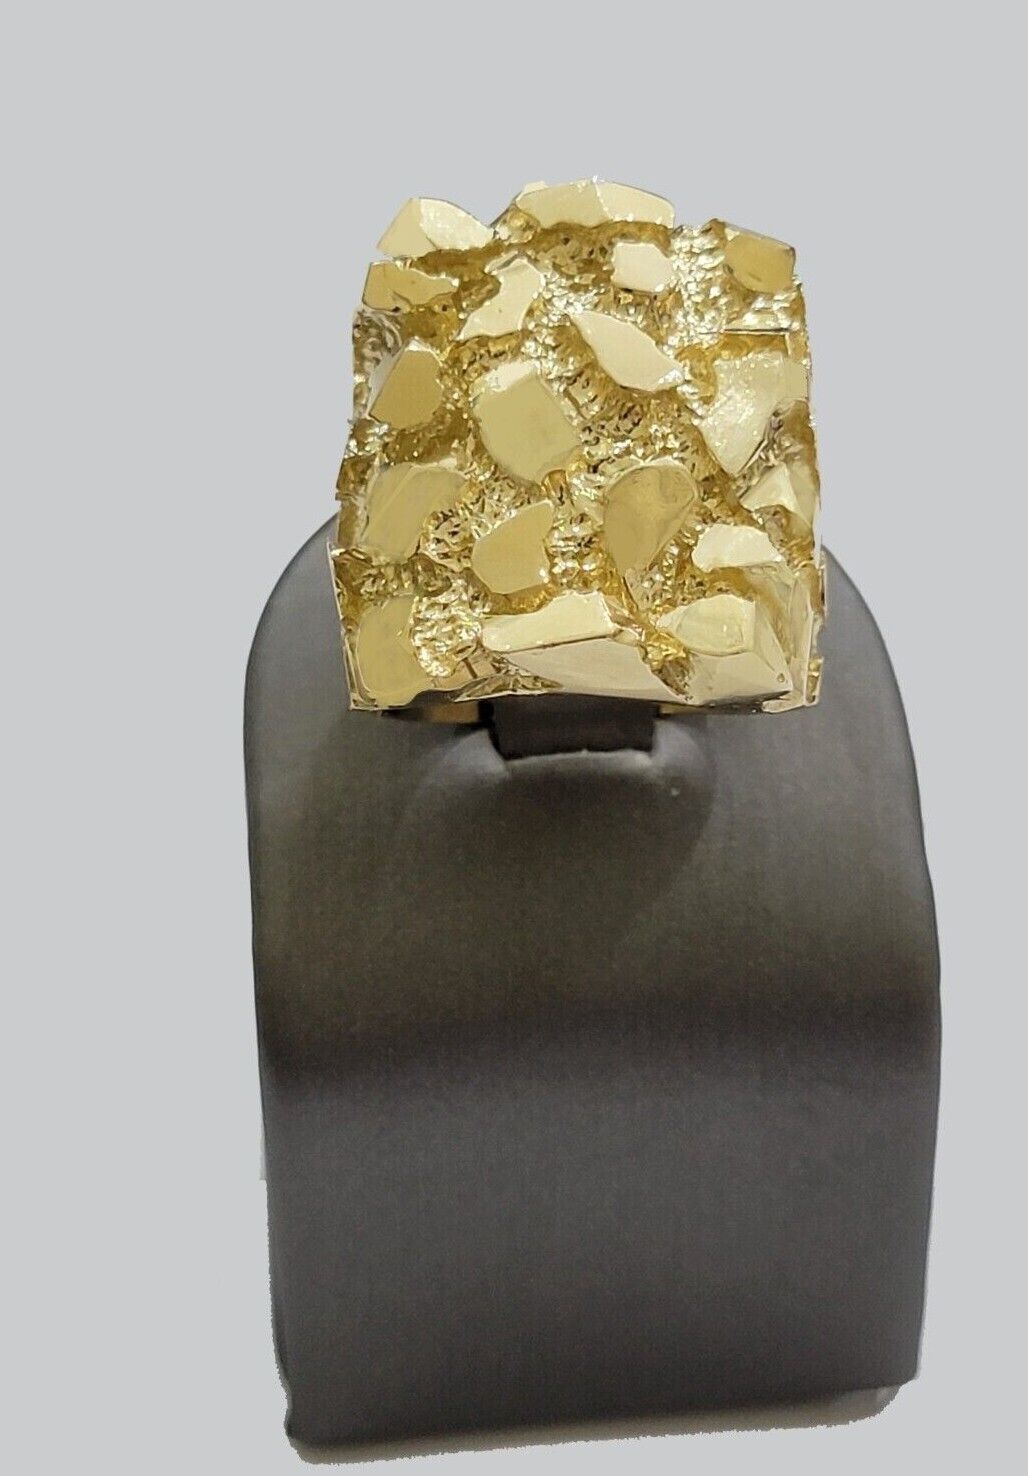 SOLID 10k Yellow Gold Nugget Ring Casual Men's Band Square New Style REAL SALE